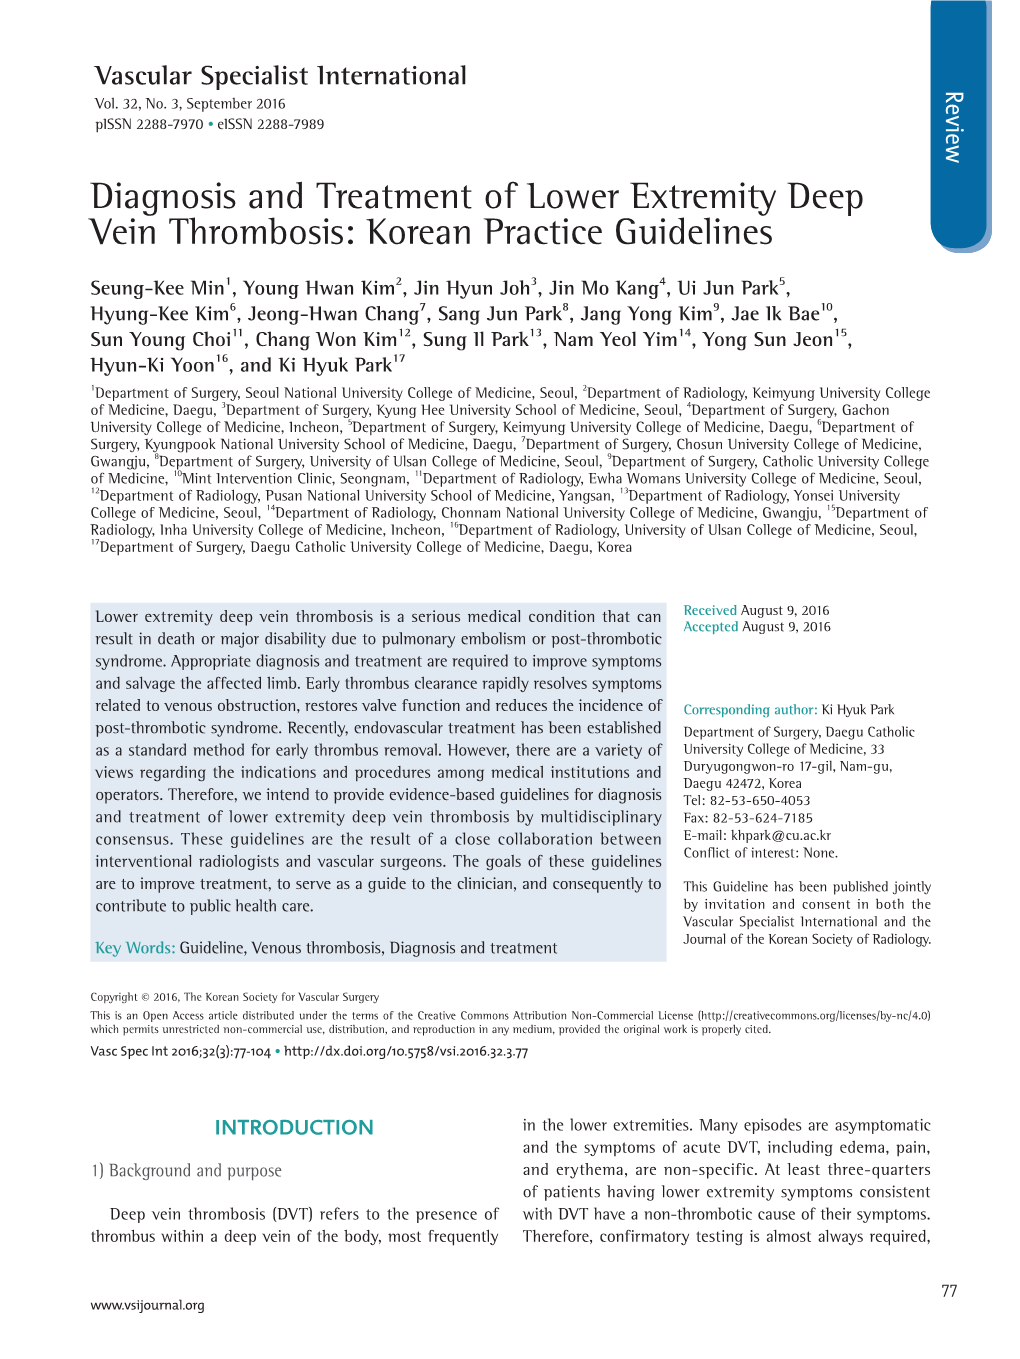 Diagnosis and Treatment of Lower Extremity Deep Vein Thrombosis: Korean Practice Guidelines